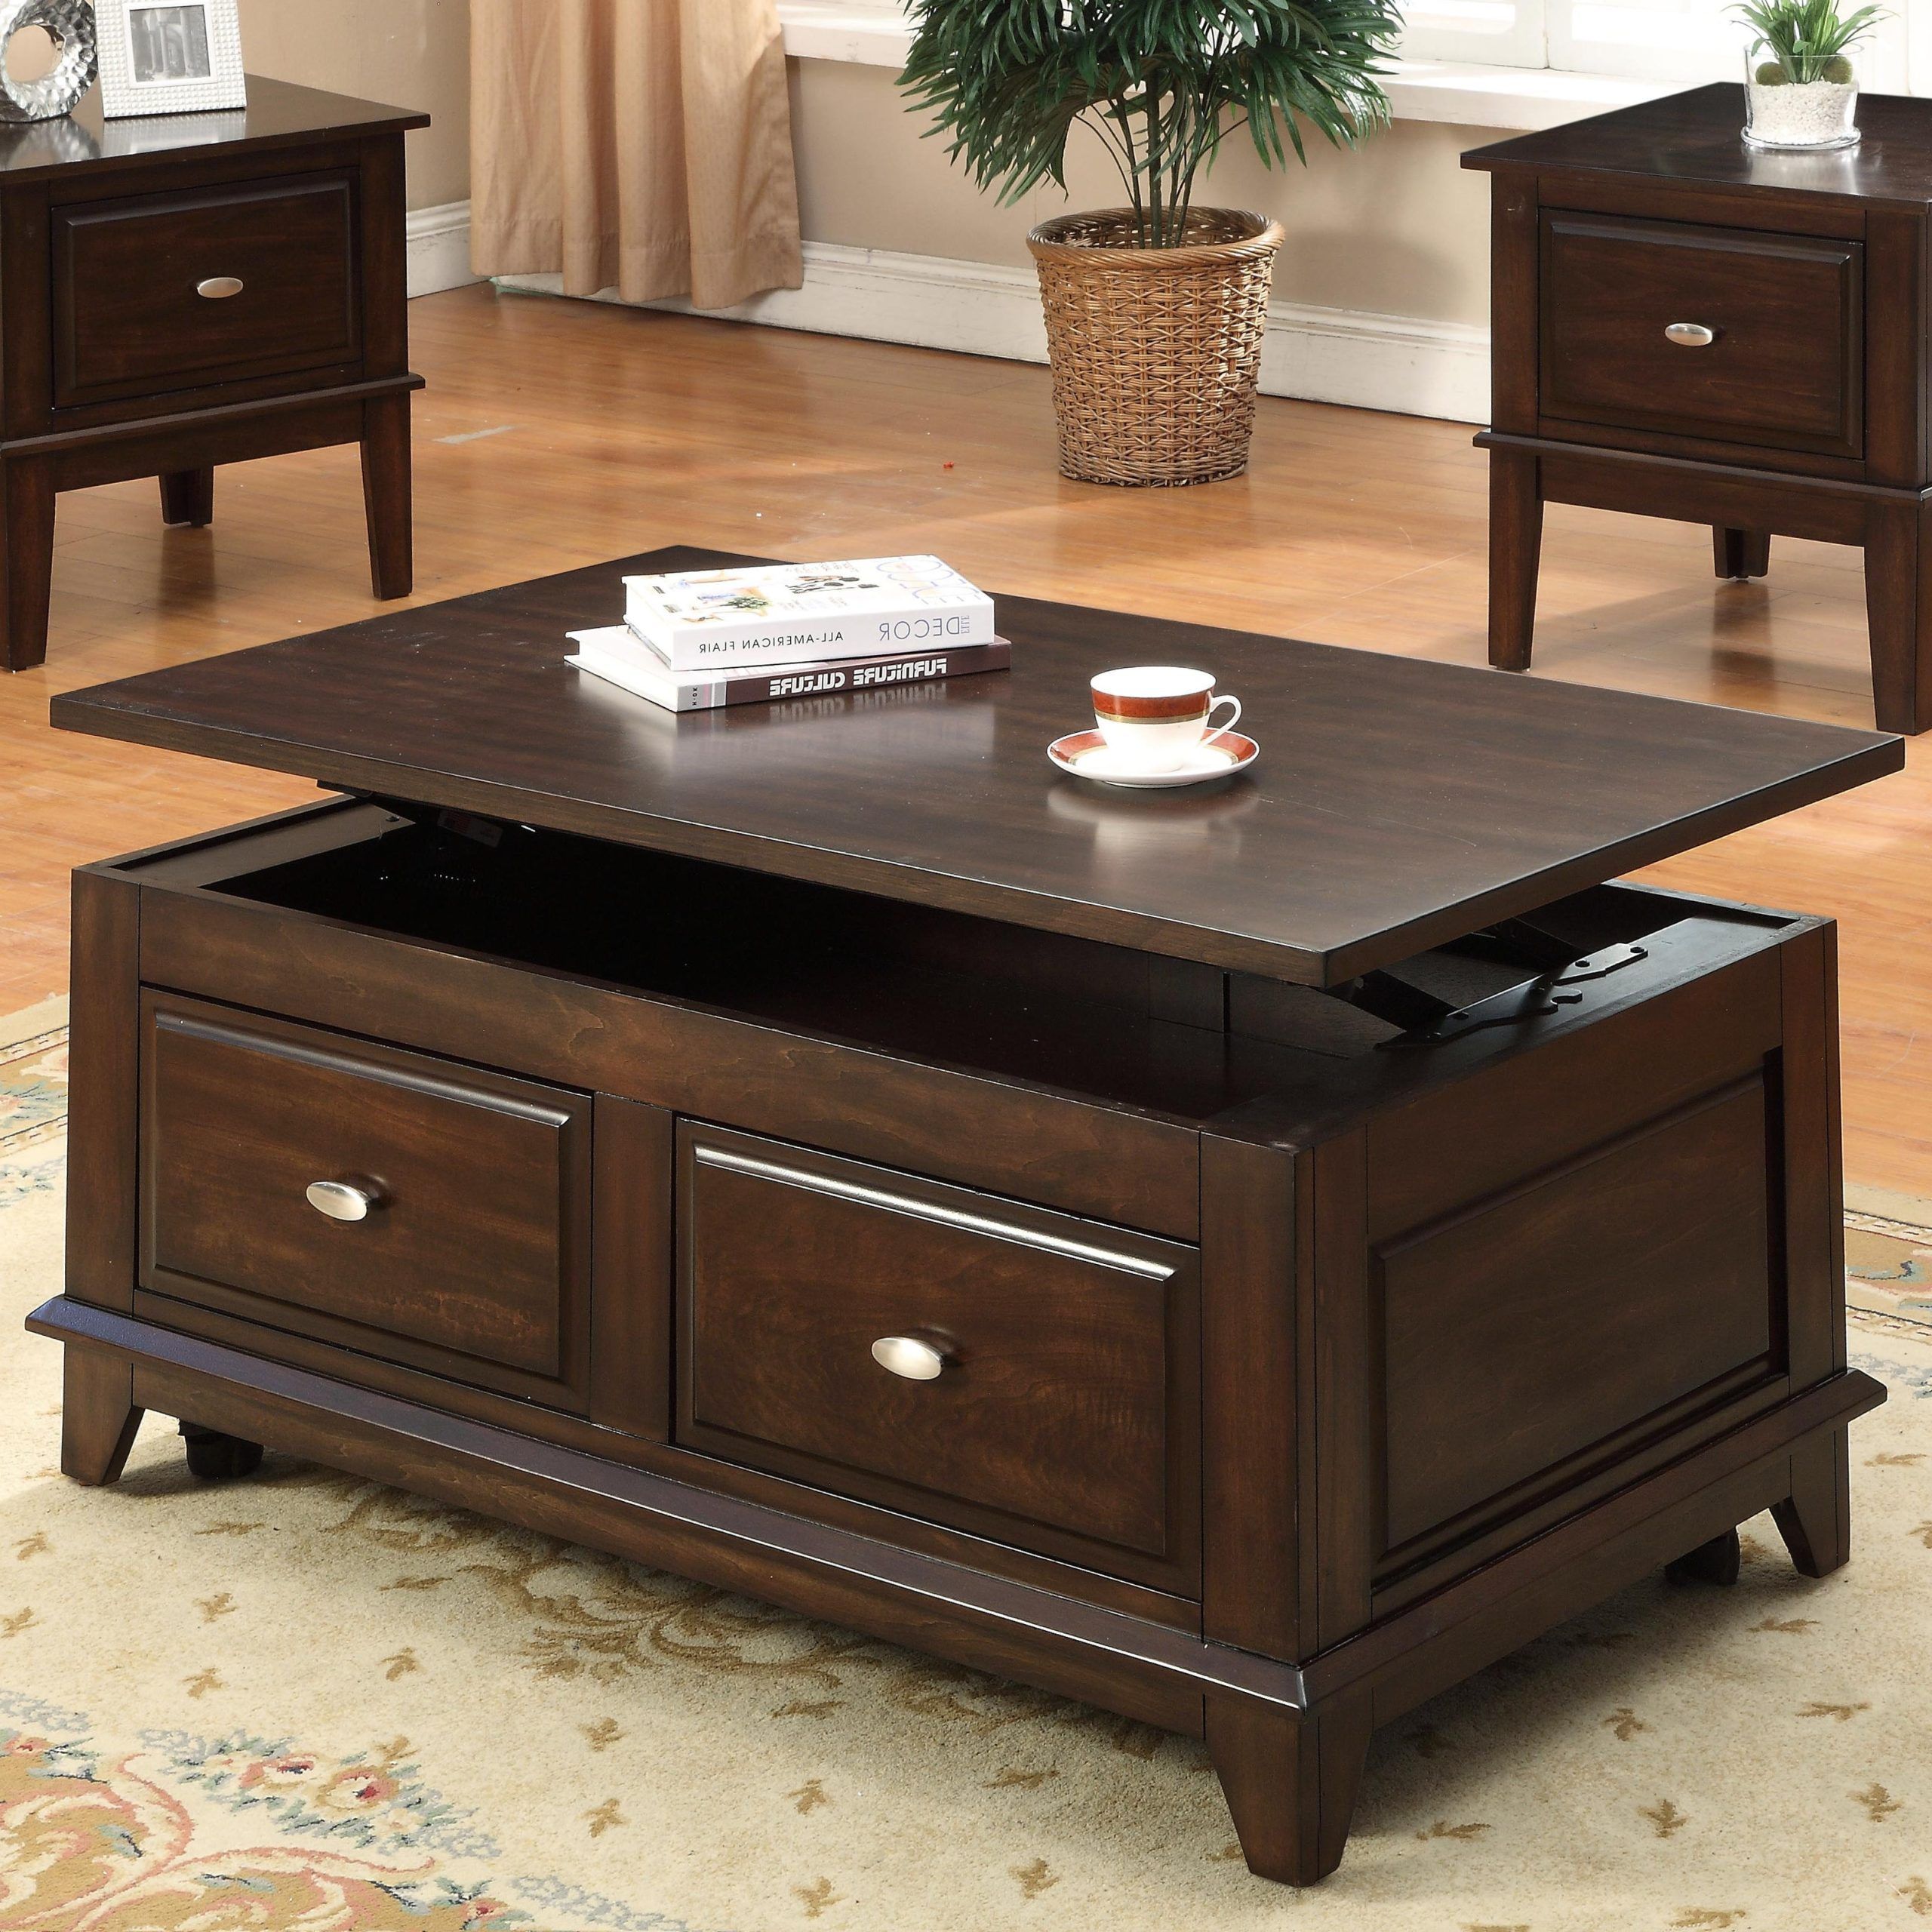 Most Current Coffee Tables With Casters Inside Crown Mark Harmon 4111 01 Lift Top Coffee Table With Casters (View 4 of 15)